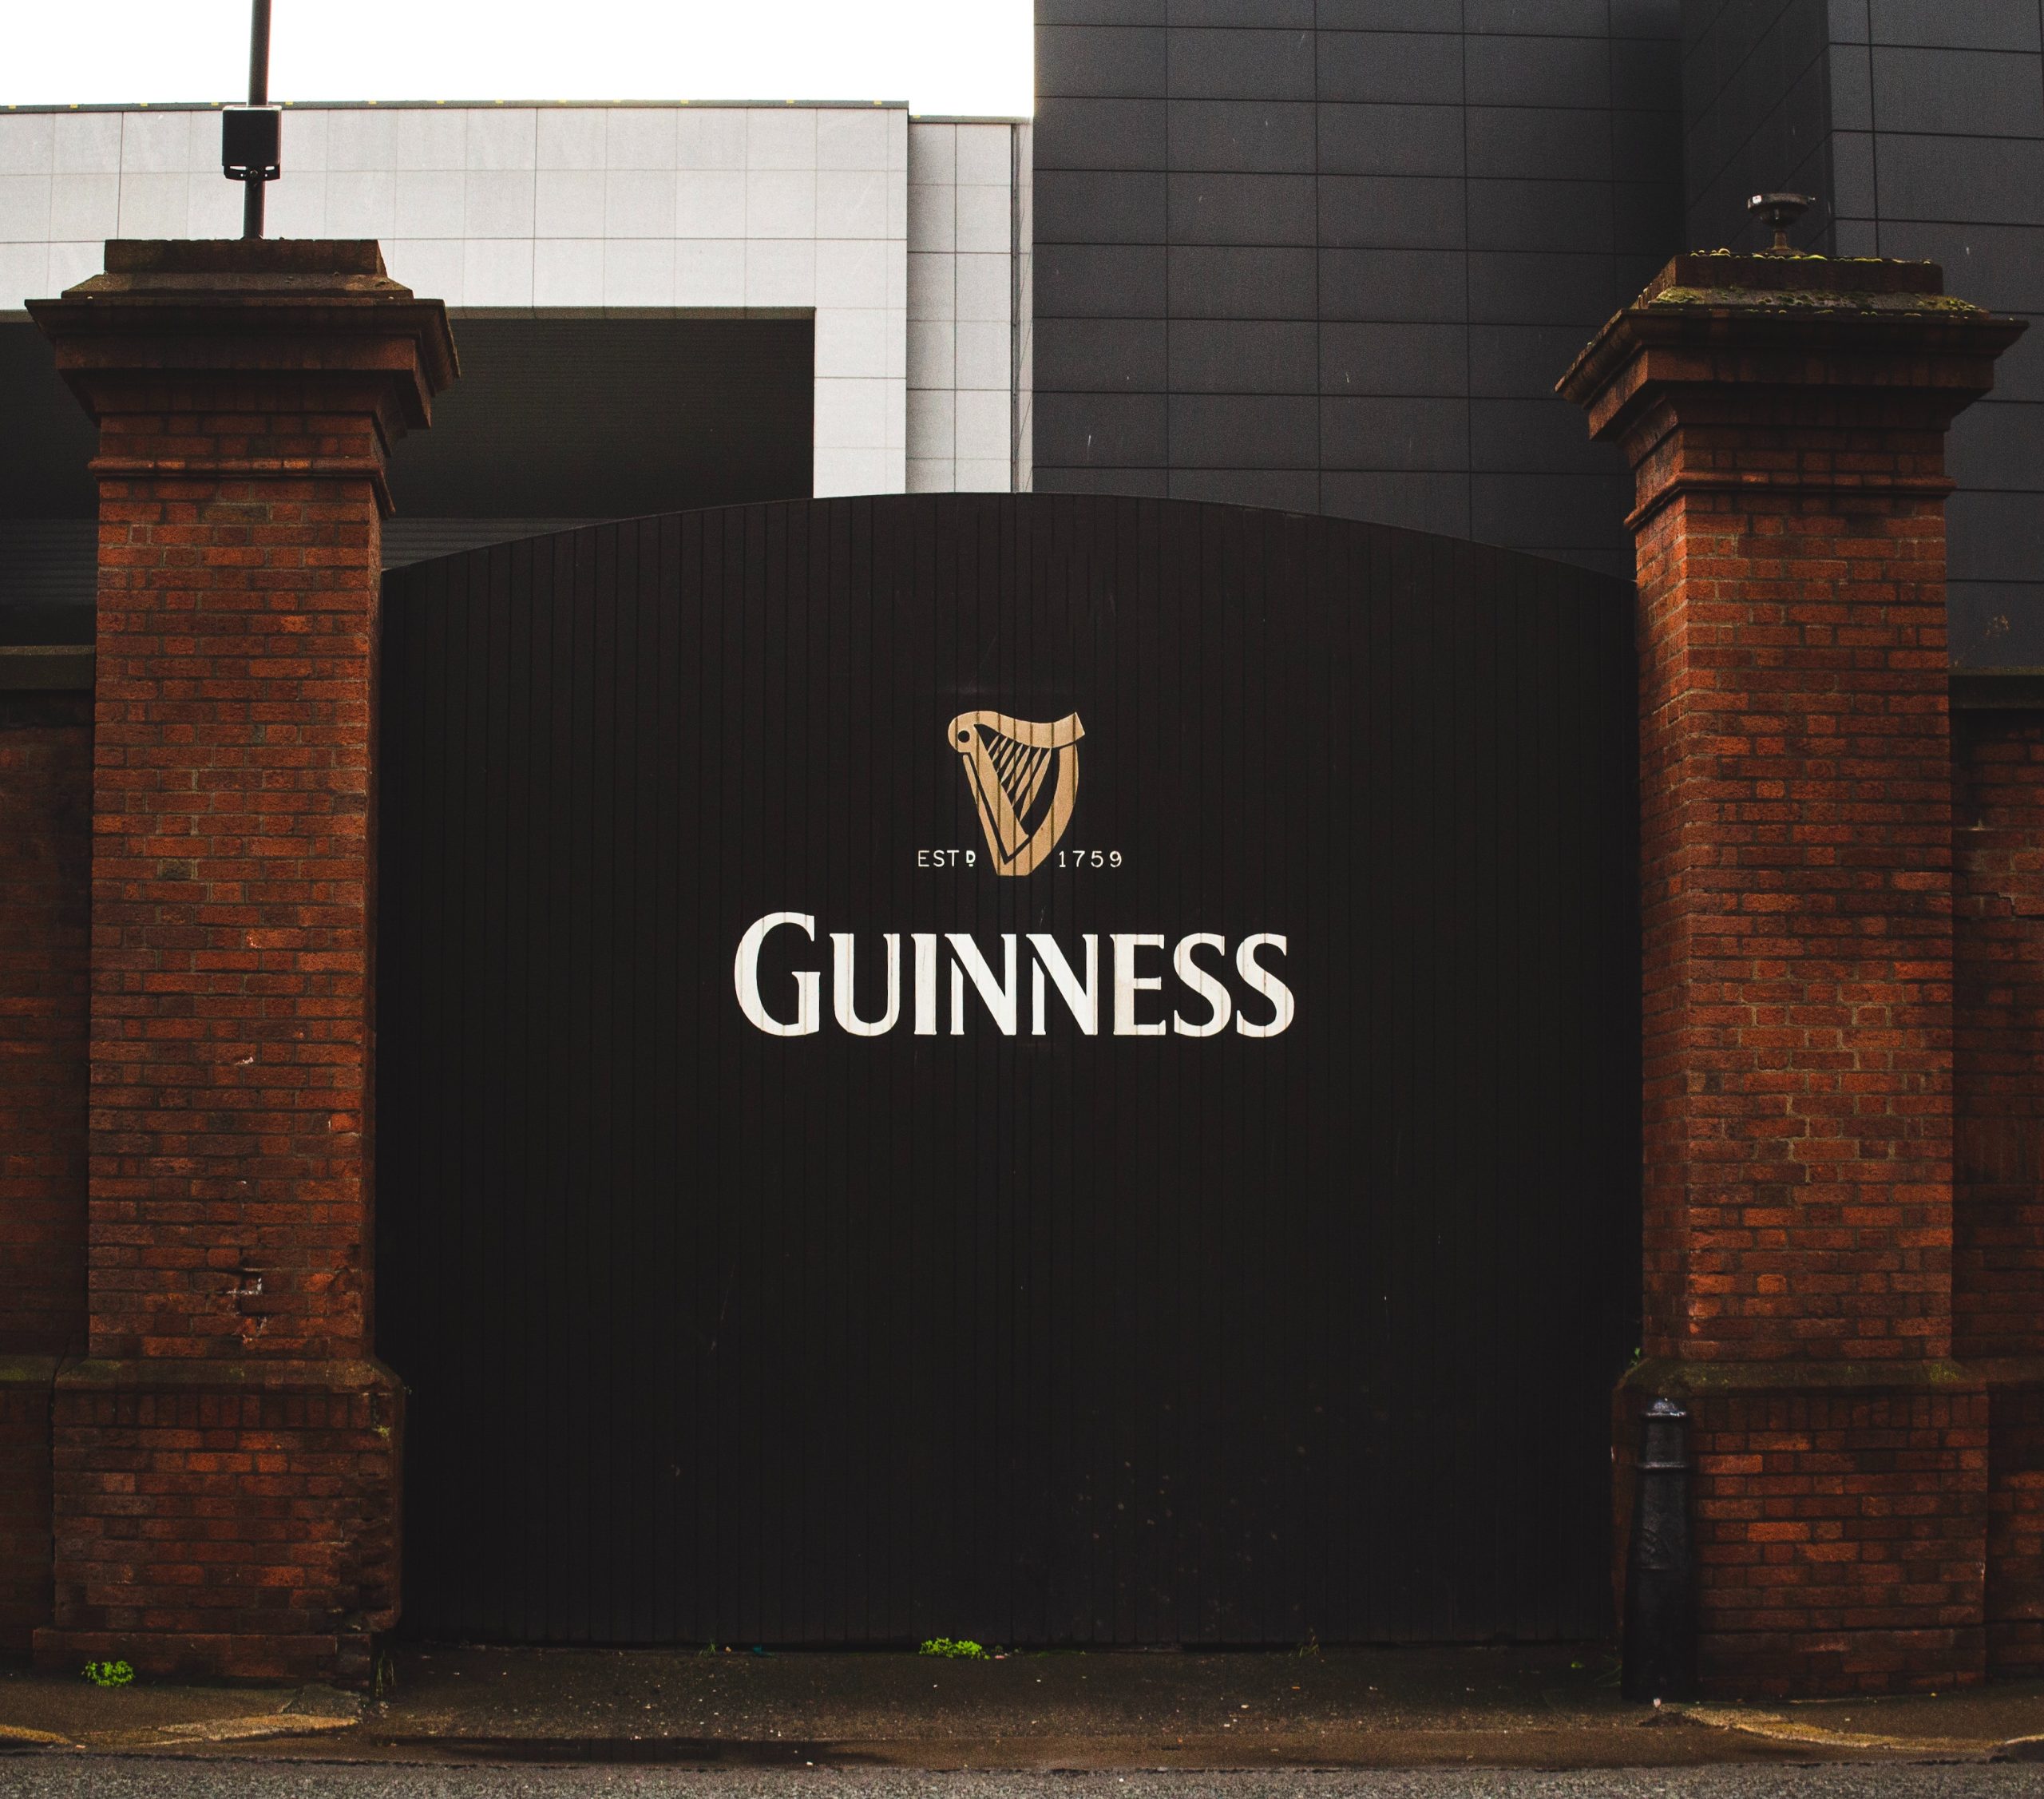 Top Things To Do in Dublin - Visit the Guinness Storehouse Factory